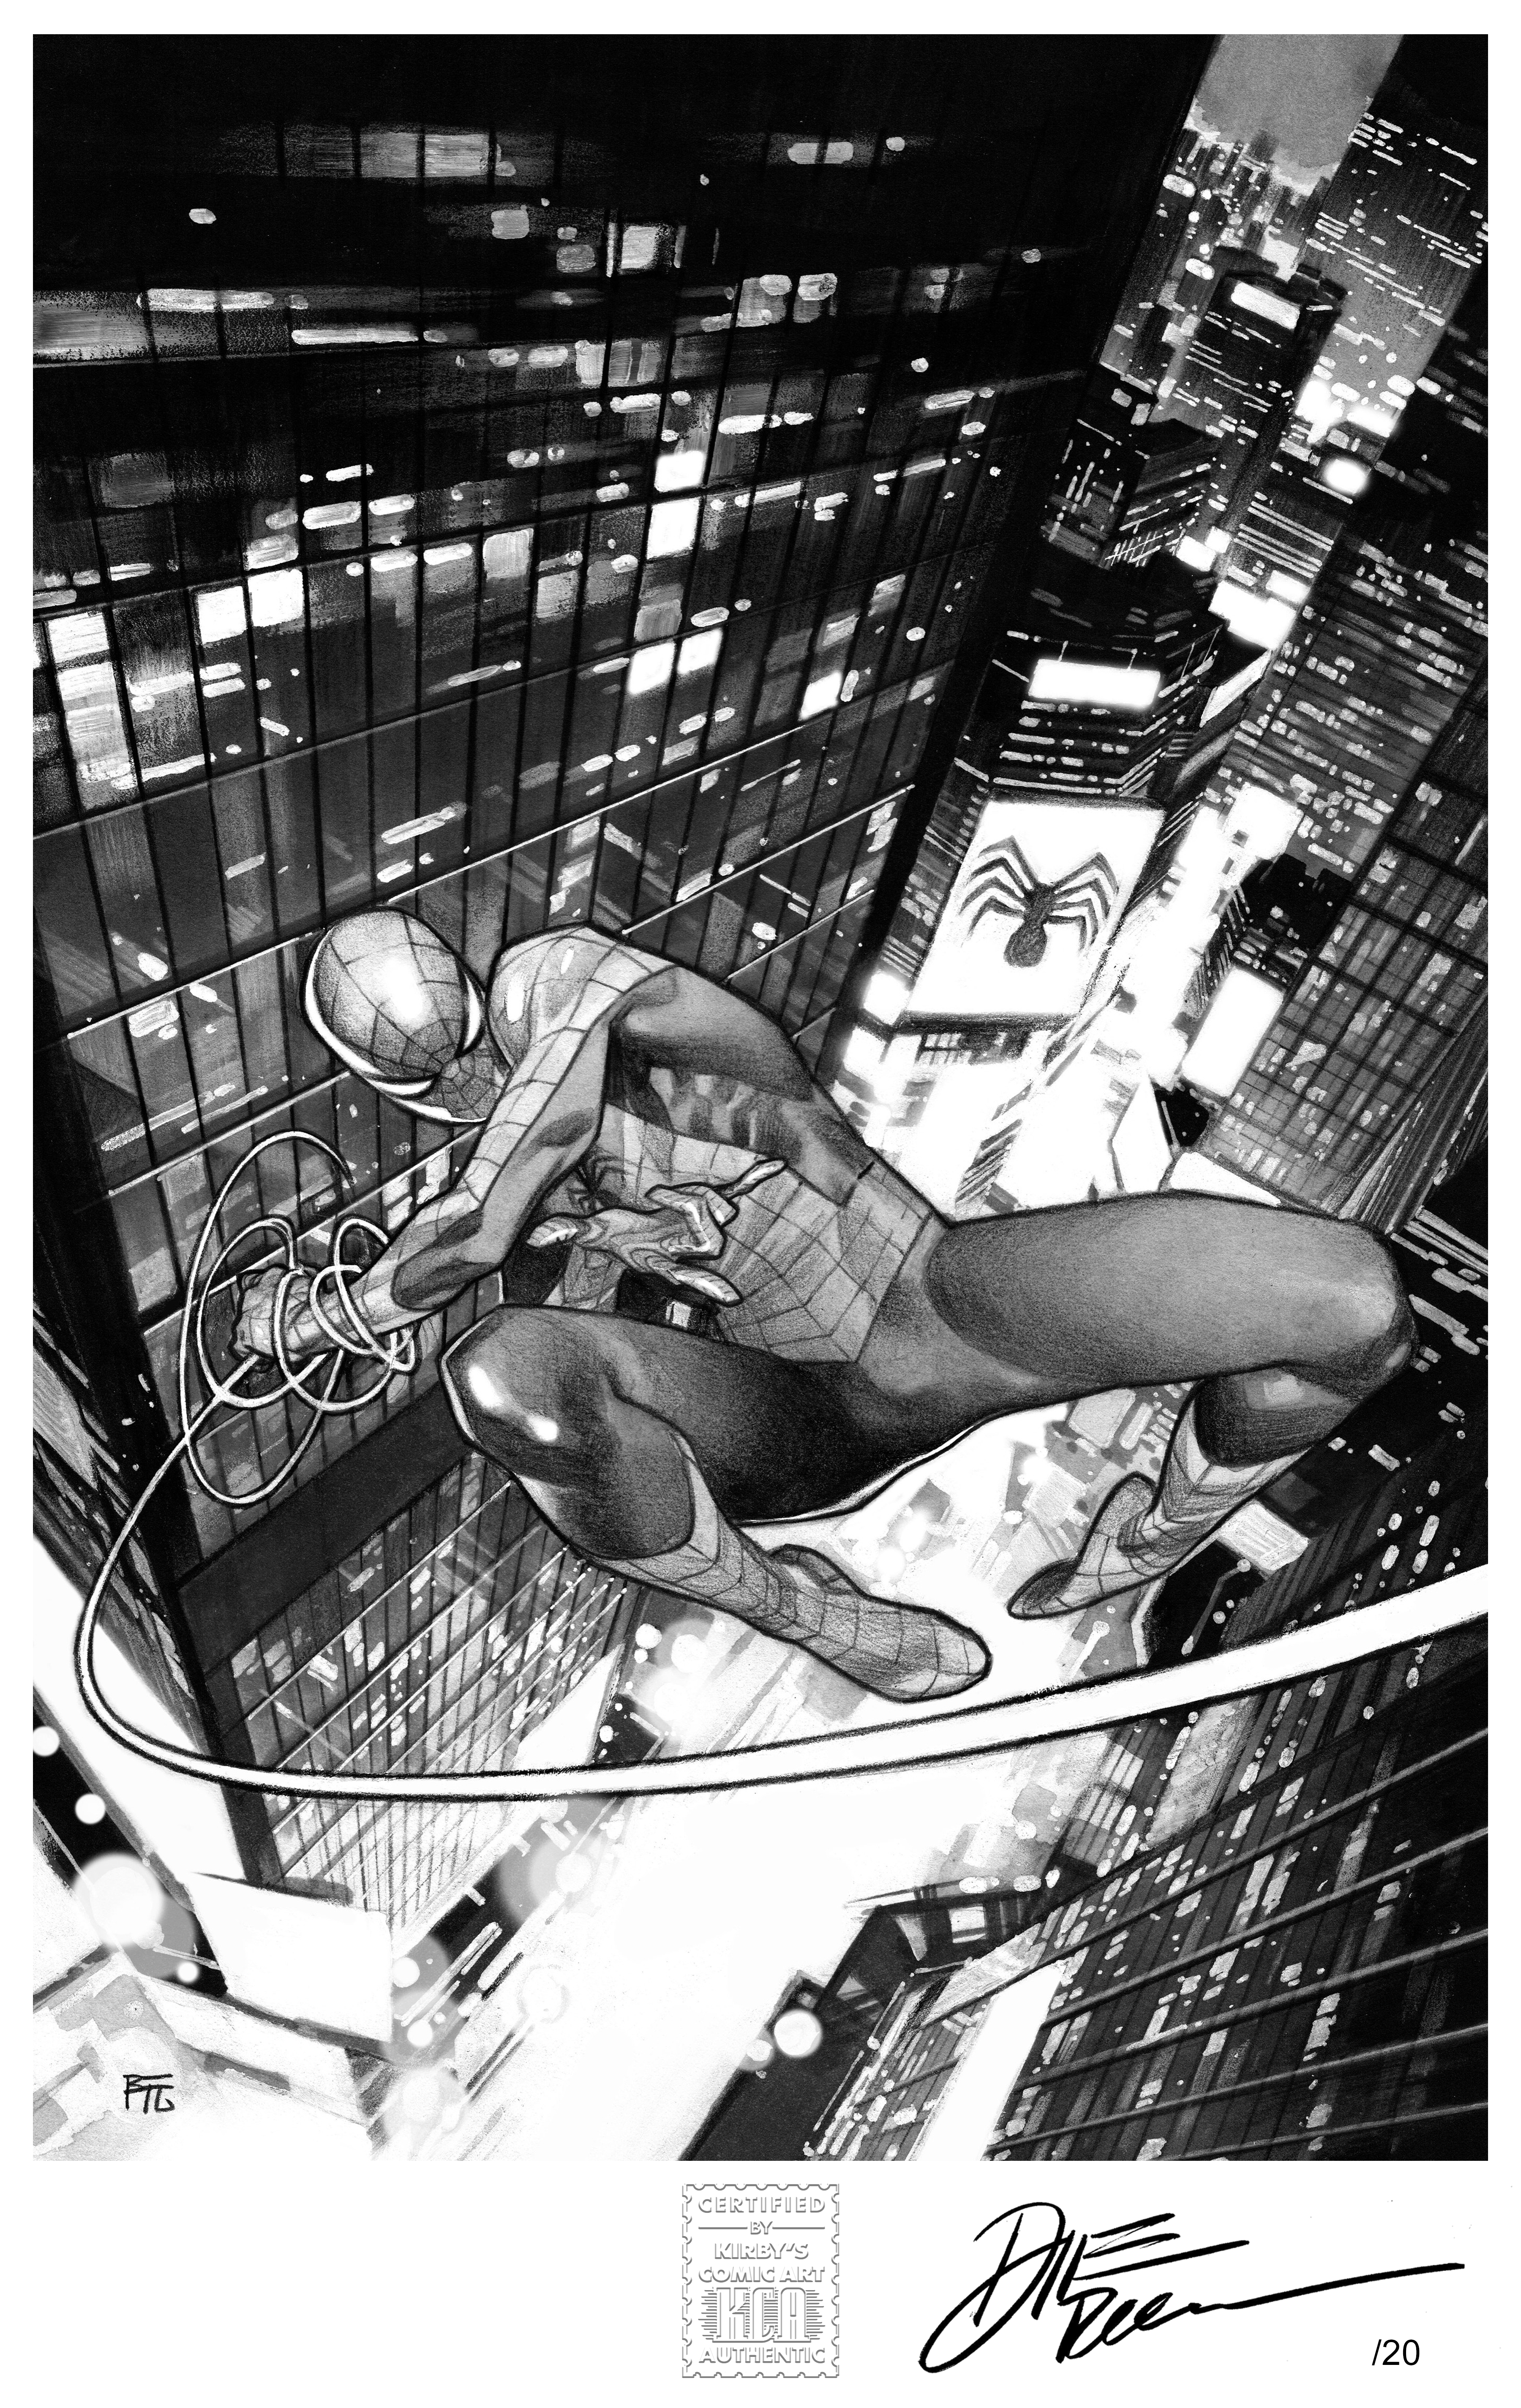 20 Limited Numbered, Signed & Remarqued Editions Available - Dike Ruan Ultimate Spider-Man 12x19